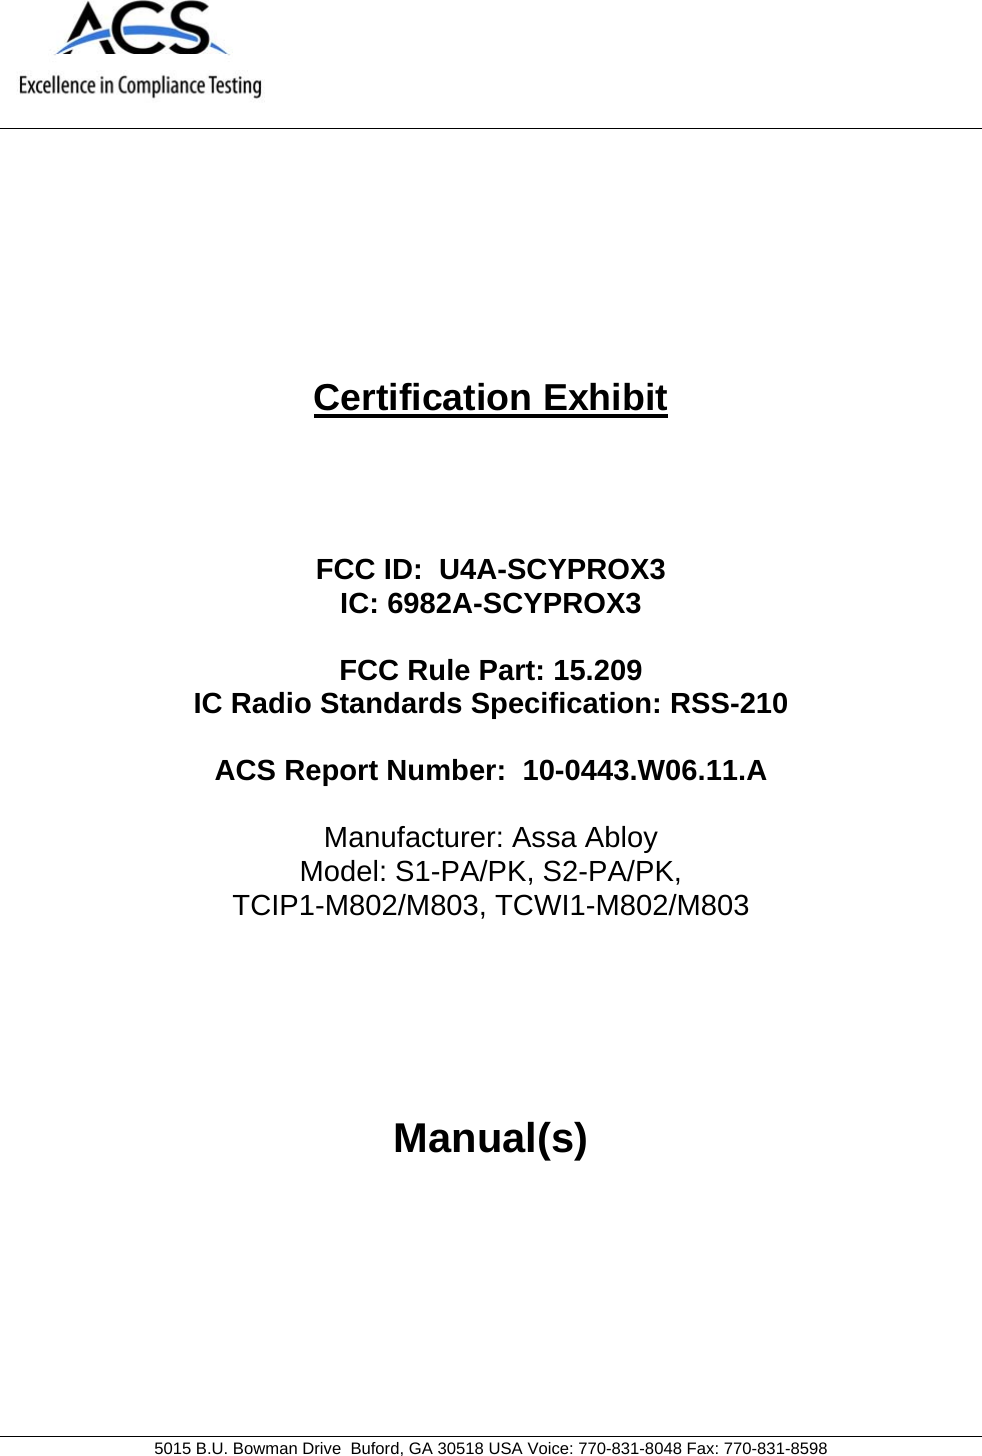     5015 B.U. Bowman Drive  Buford, GA 30518 USA Voice: 770-831-8048 Fax: 770-831-8598   Certification Exhibit     FCC ID:  U4A-SCYPROX3 IC: 6982A-SCYPROX3  FCC Rule Part: 15.209 IC Radio Standards Specification: RSS-210  ACS Report Number:  10-0443.W06.11.A   Manufacturer: Assa Abloy Model: S1-PA/PK, S2-PA/PK,                                                   TCIP1-M802/M803, TCWI1-M802/M803     Manual(s)  